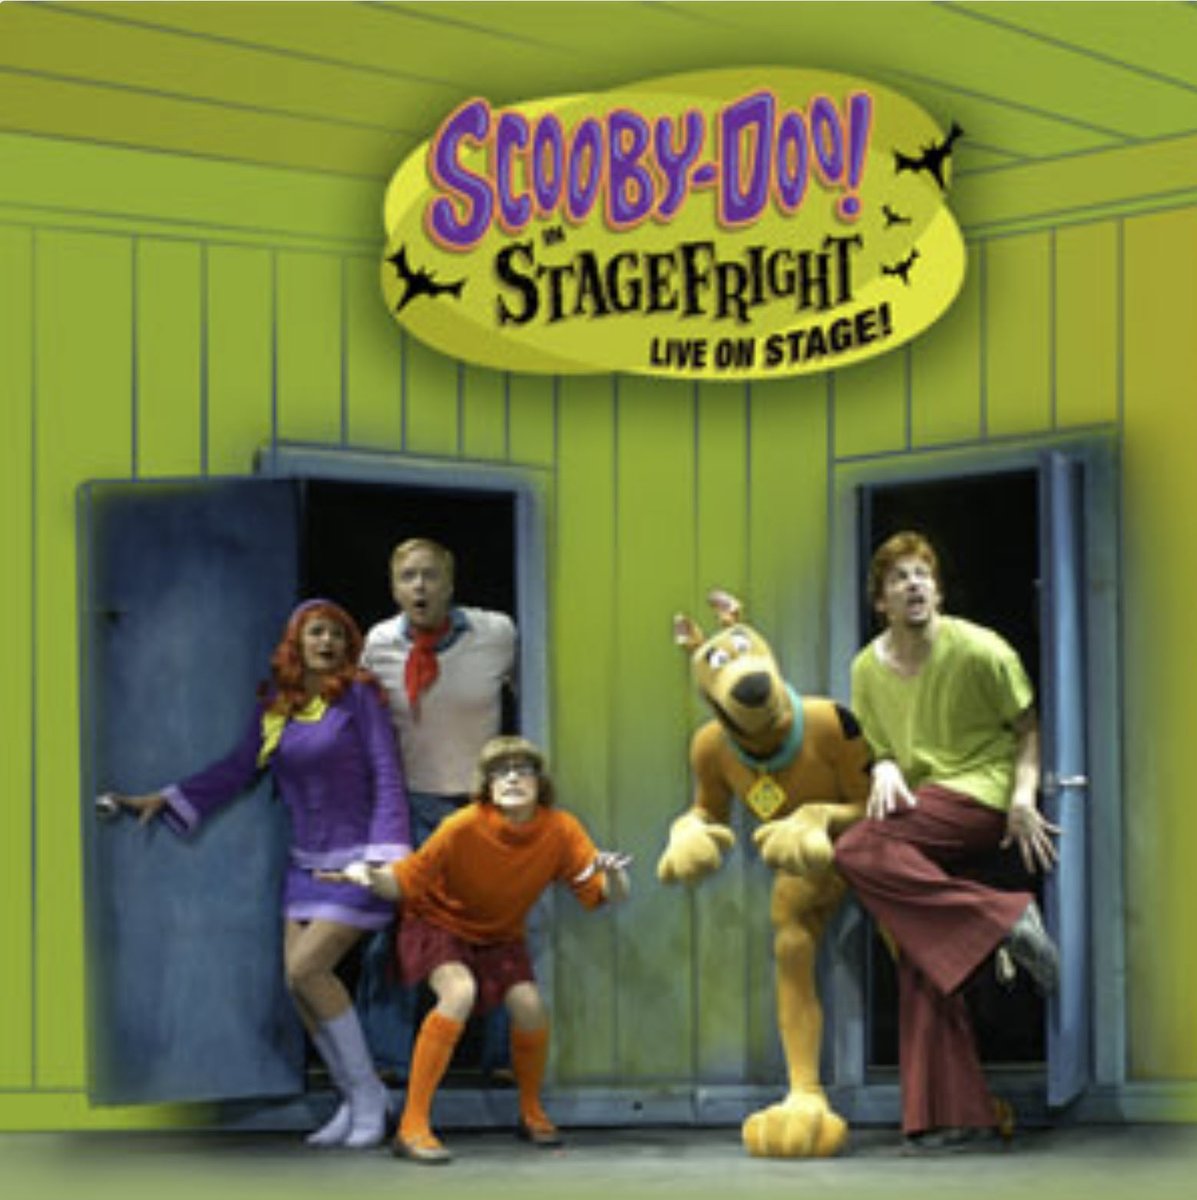 ON THIS DAY... May 2, 2002 - Scooby-Doo in Stagefright, Live on Stage! had it's first performance at the Broward Center in Fort Lauderdale, FL. #scoobydoohistory #ScoobyDoo